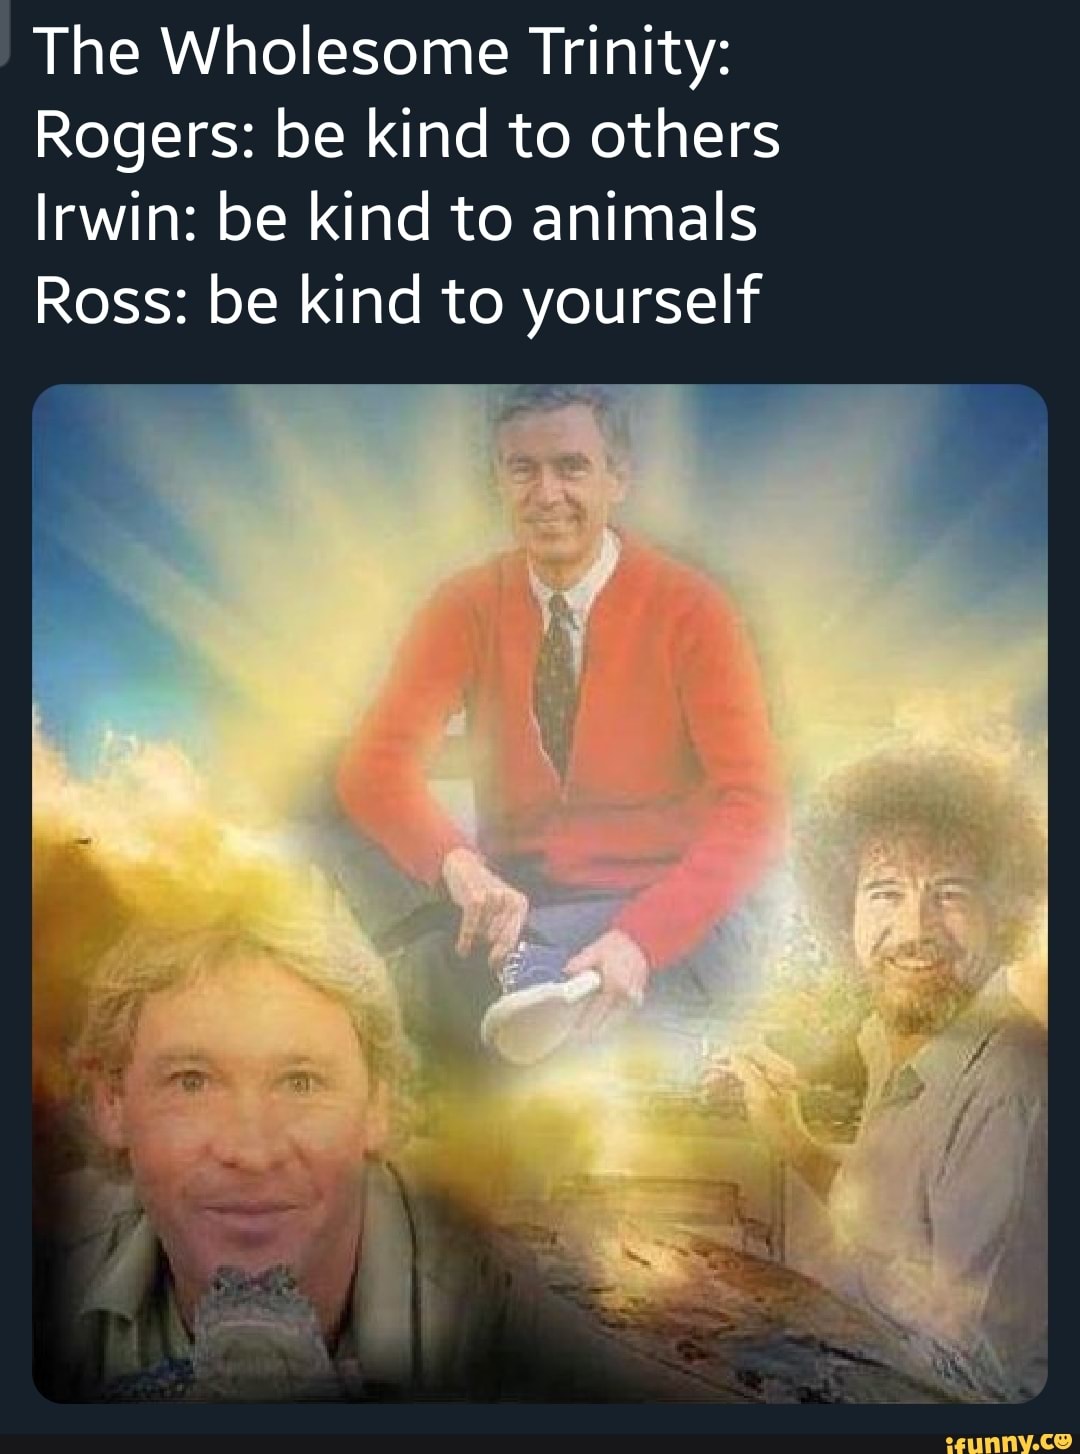 bob ross steve irwin and mr rogers - The Wholesome Trinity Rogers be kind to others Irwin be kind to animals Ross be kind to yourself ifunny.co